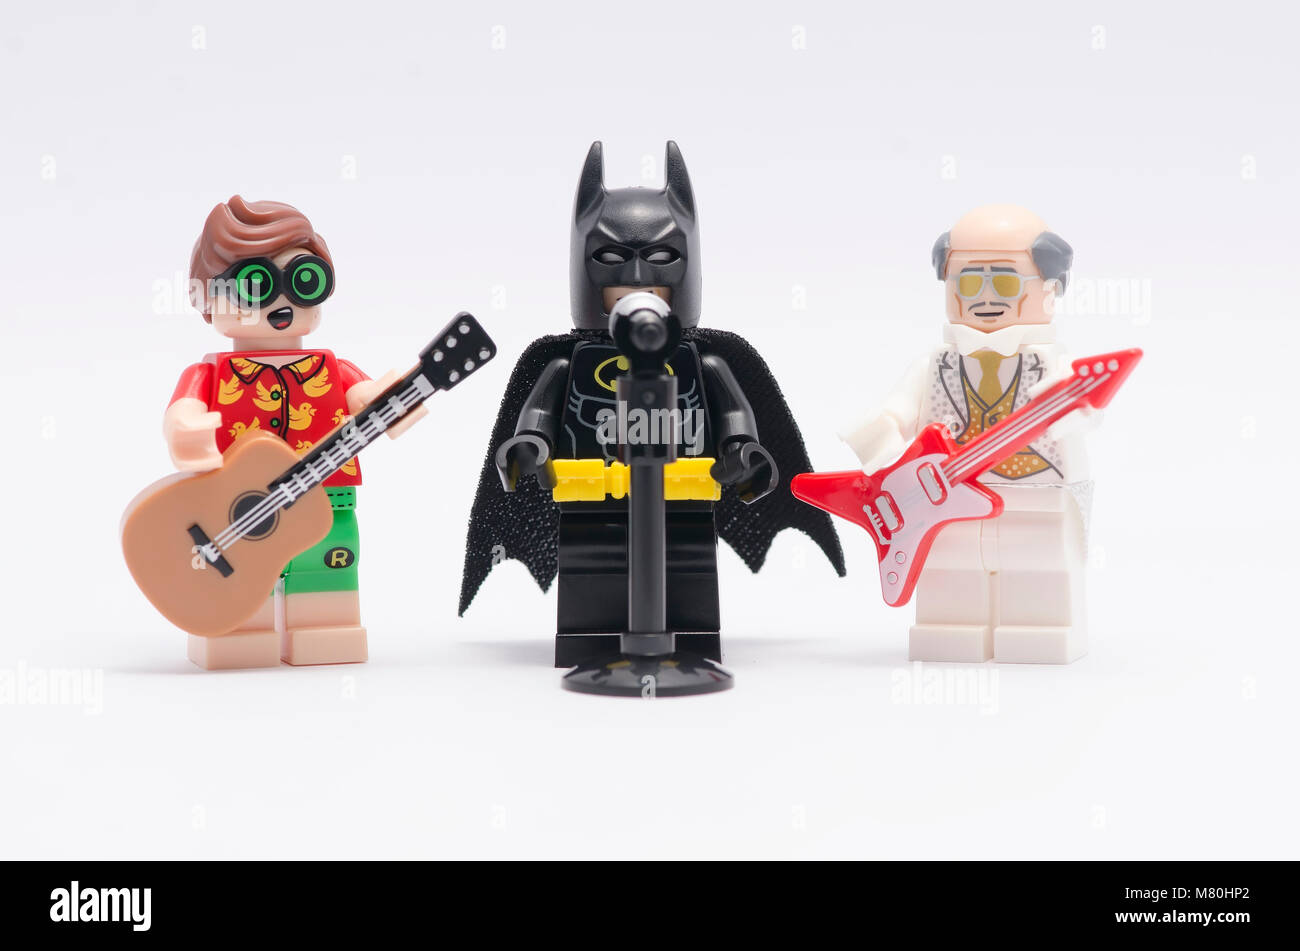 lego batman singing with alfred and robin play the guitar. isolated on  white background Stock Photo - Alamy